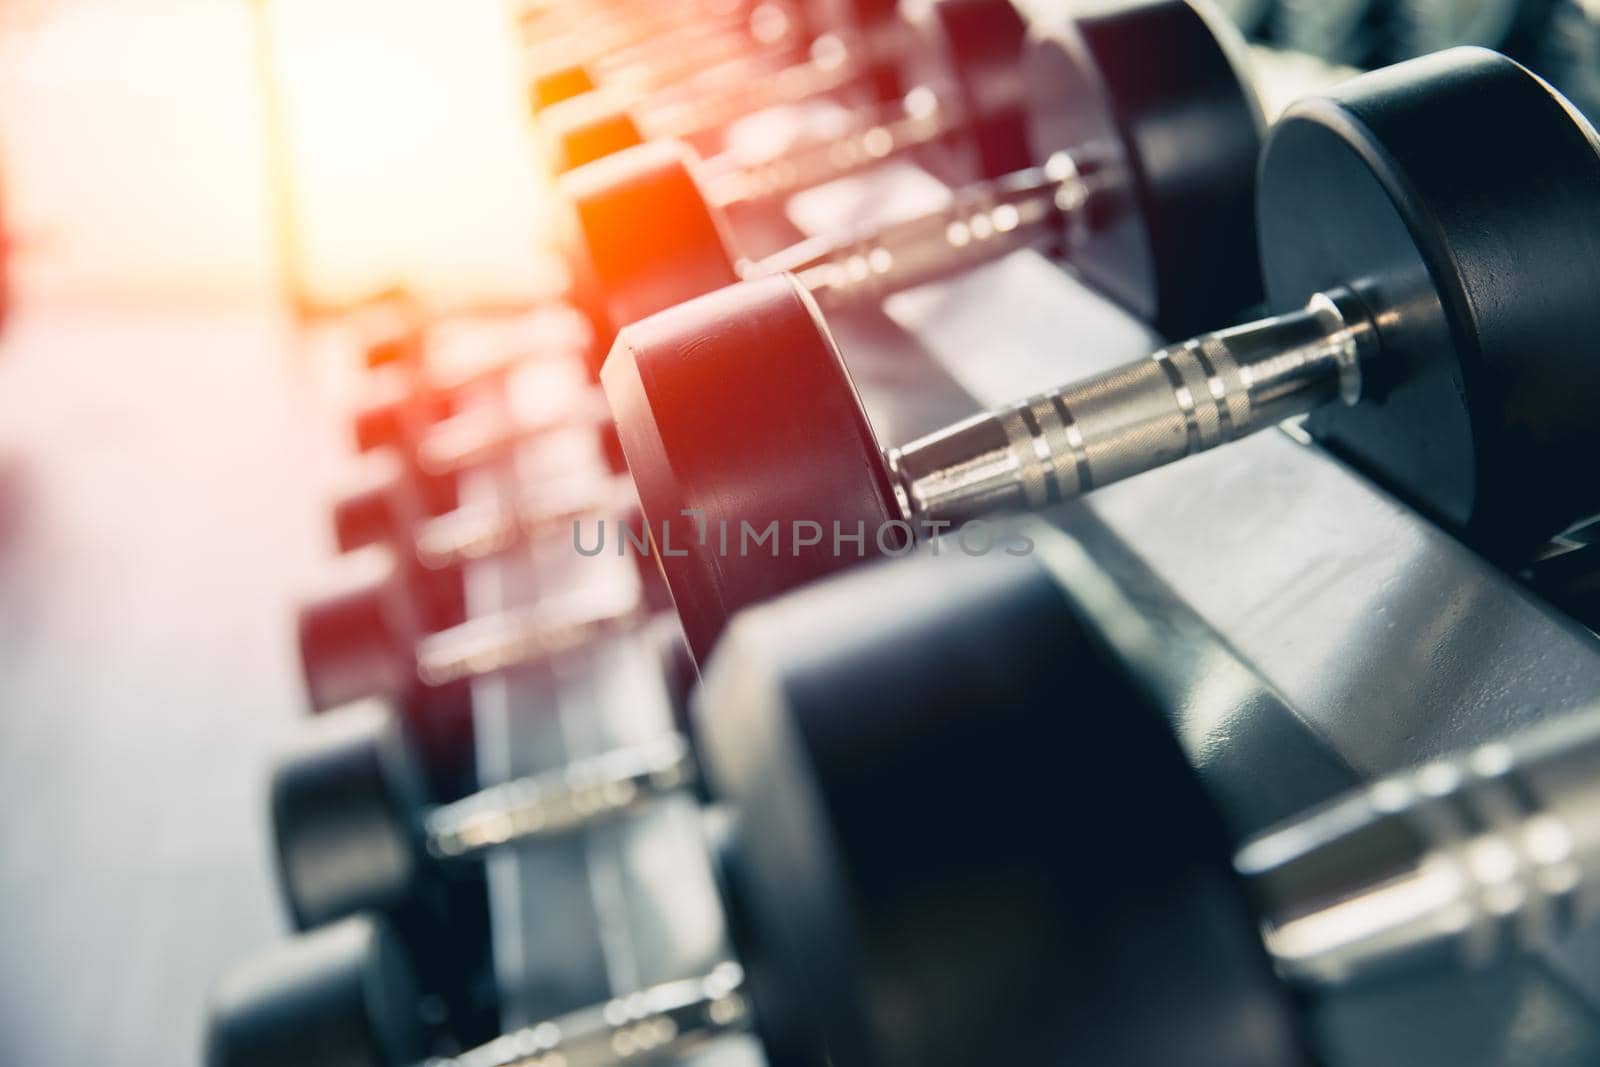 Weight dumbbell for muscle training in gym fitness sport club, closeup shot by qualitystocks